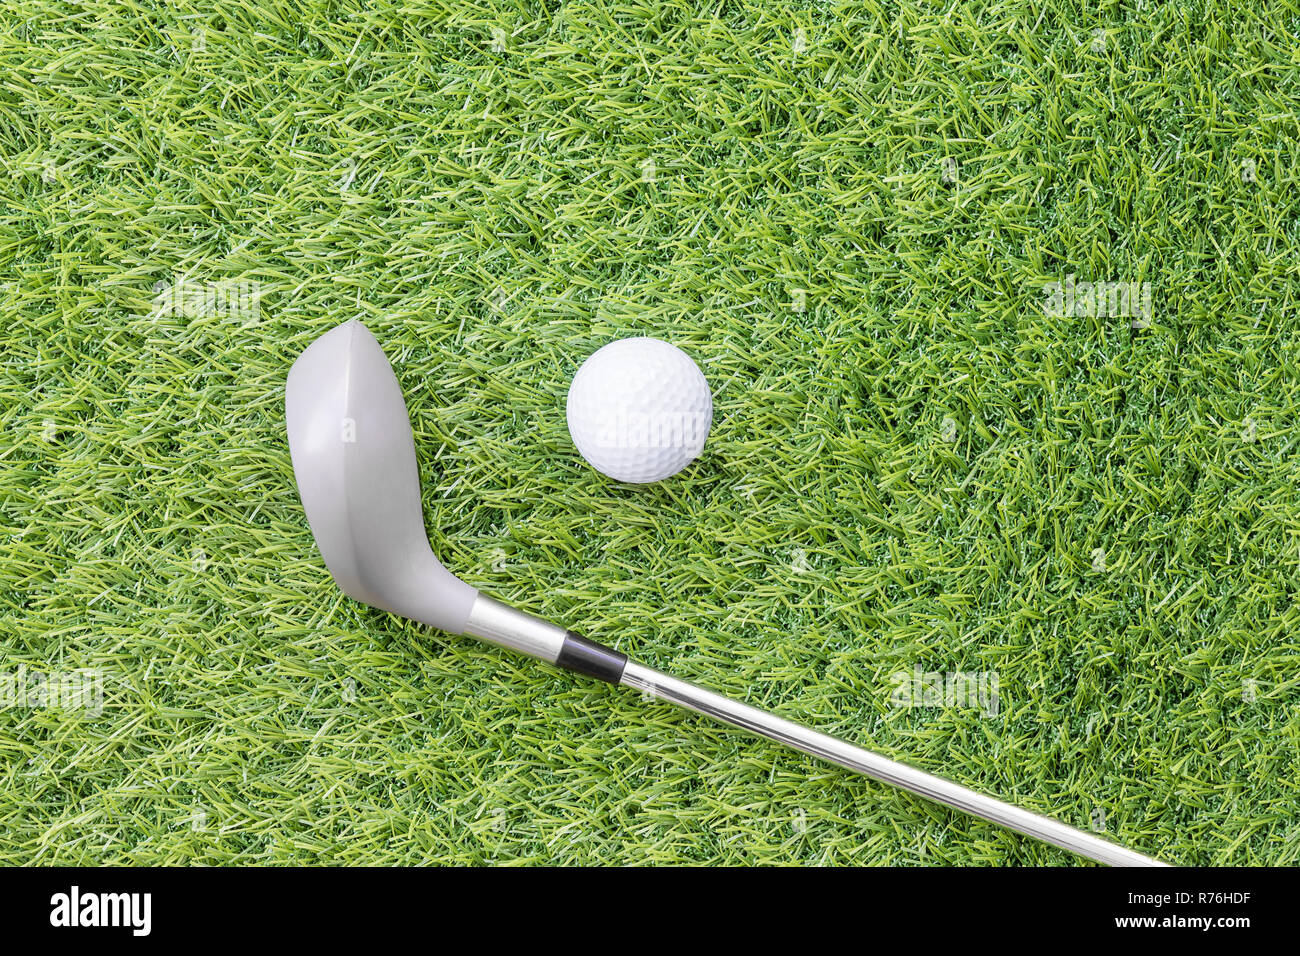 Sport objects related to golf equipment Stock Photo